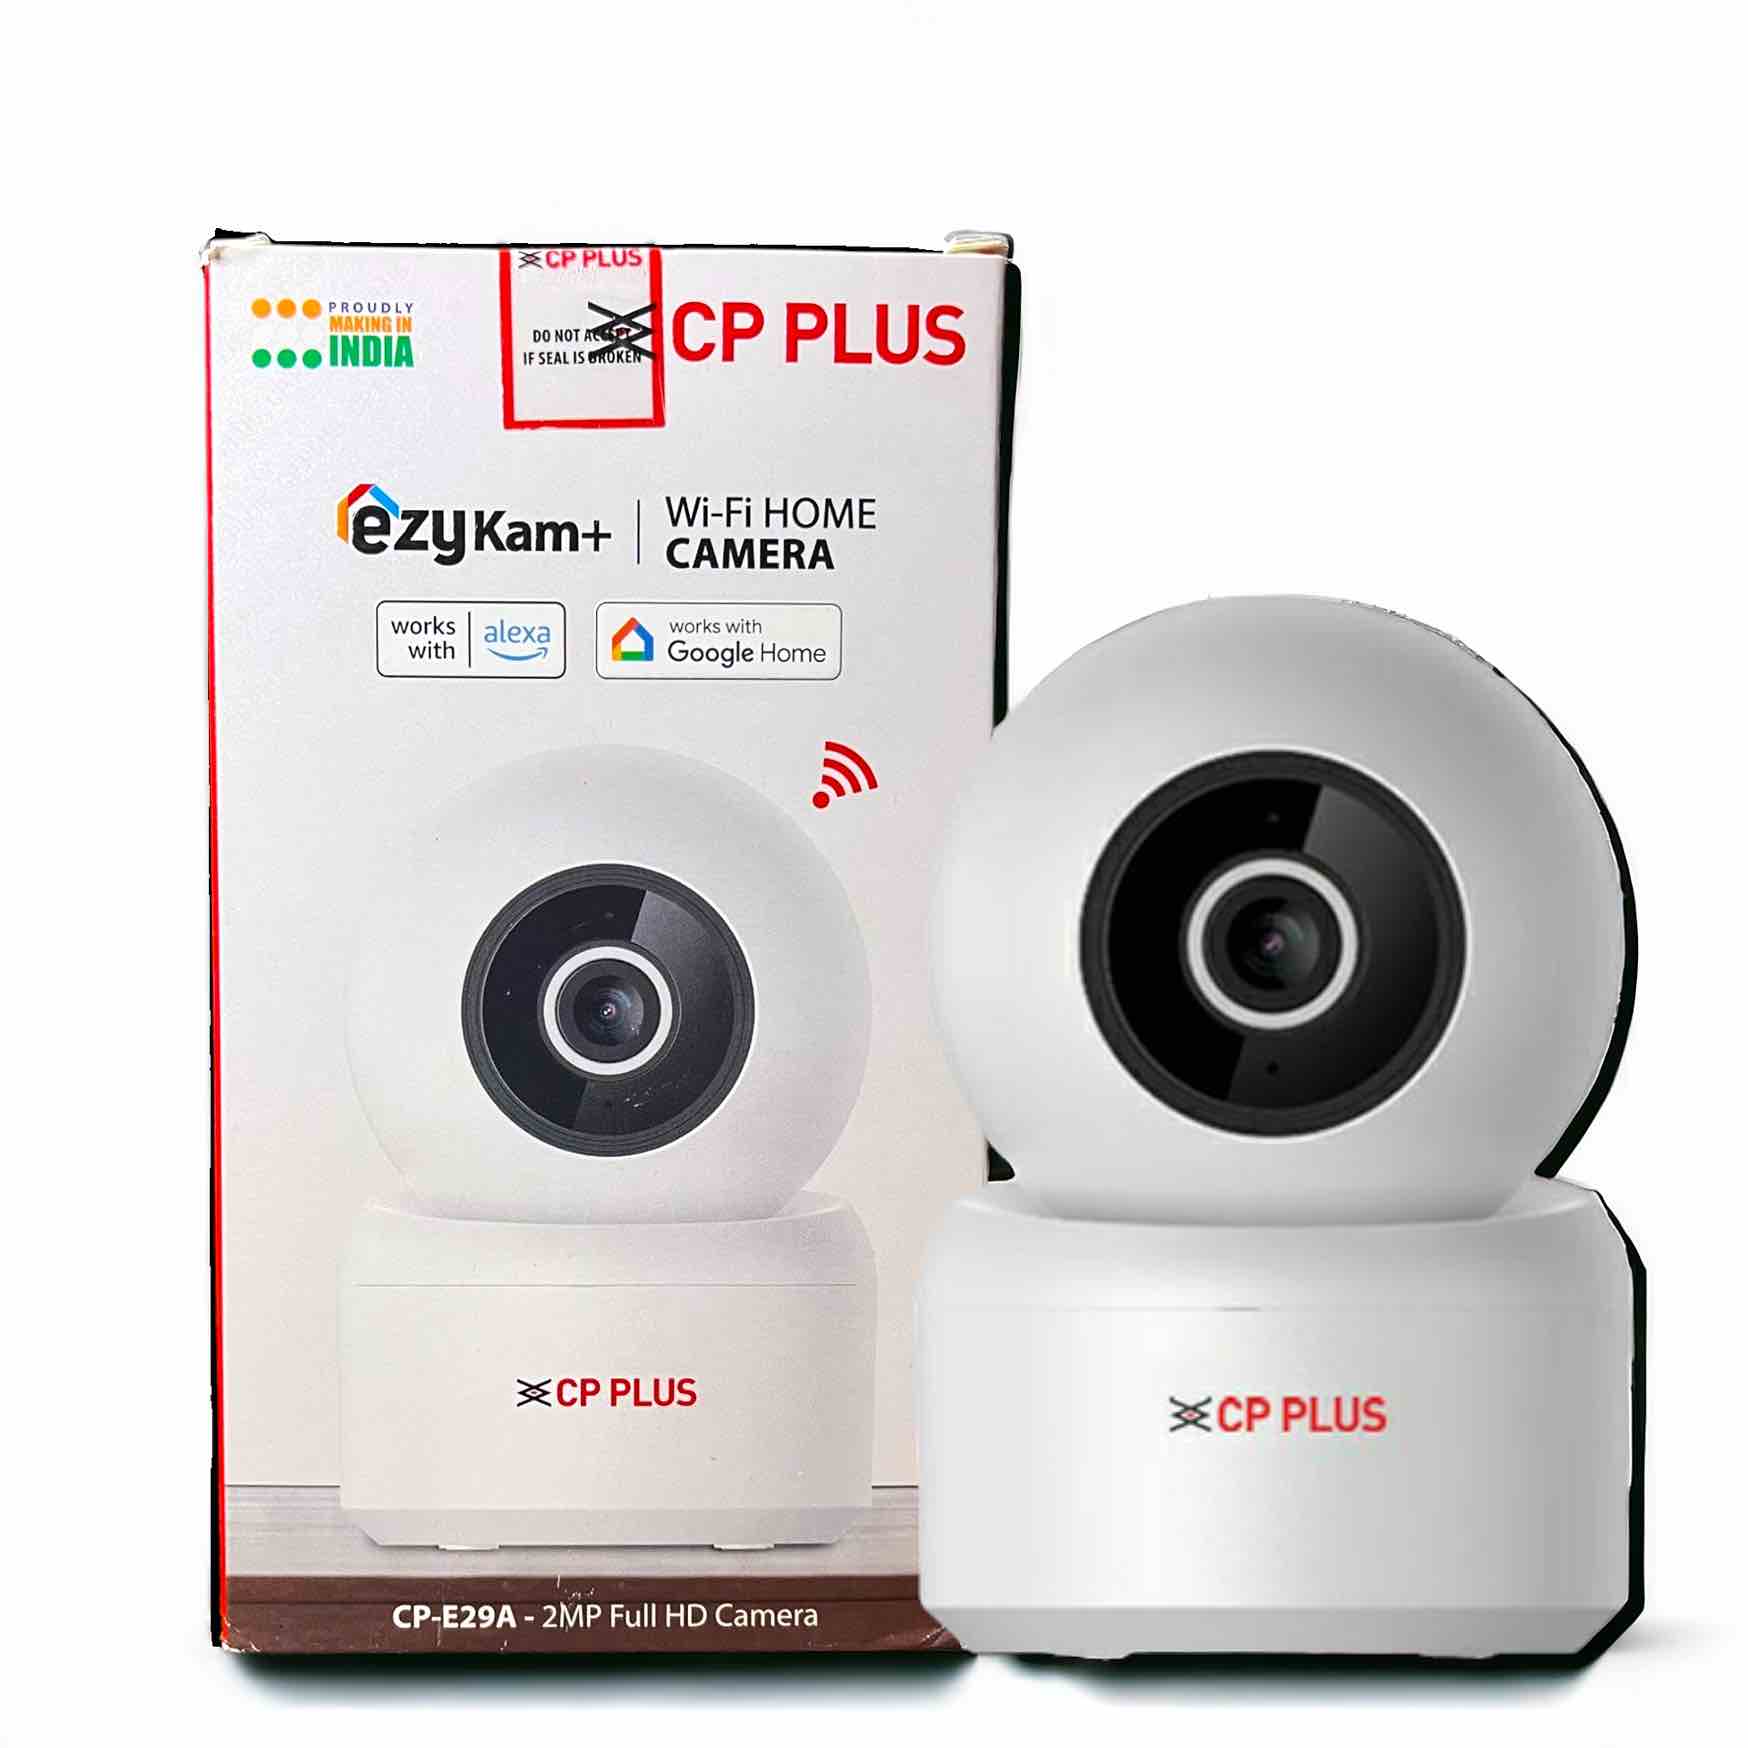 CP Plus E29A Ezykam 360 Degree 2MP Full HD WiFi Camera with Alexa and Google Assistant Support